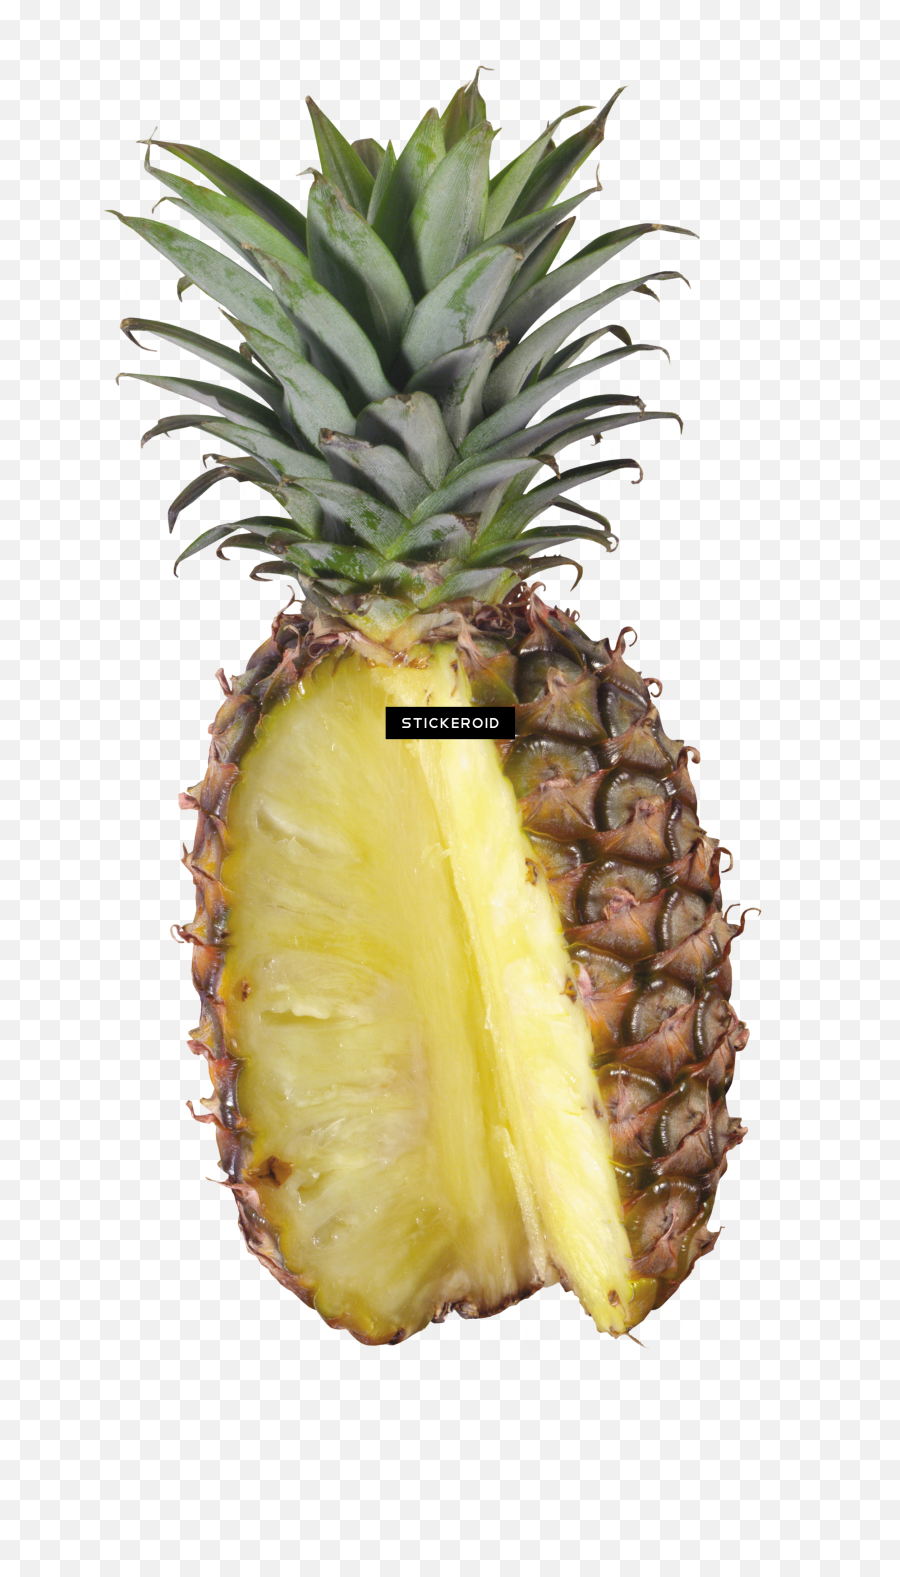 Download Pineapple Fruit - Pineapple Png Image With No Pineapple,Pinapple Png